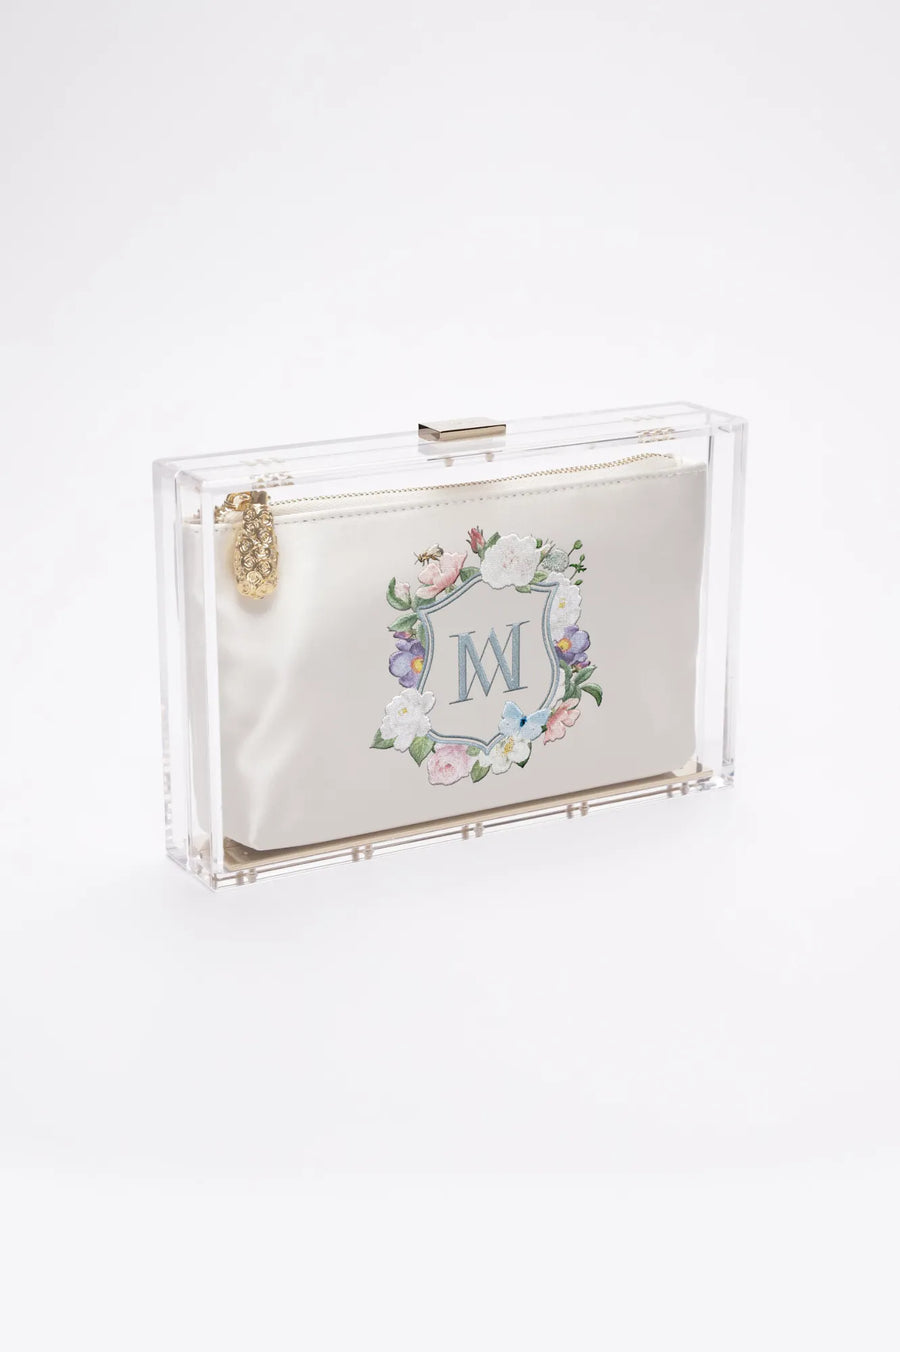 A Mia - Clear Acrylic Clutch with Floral Monogram Embroidery from The Bella Rosa Collection.